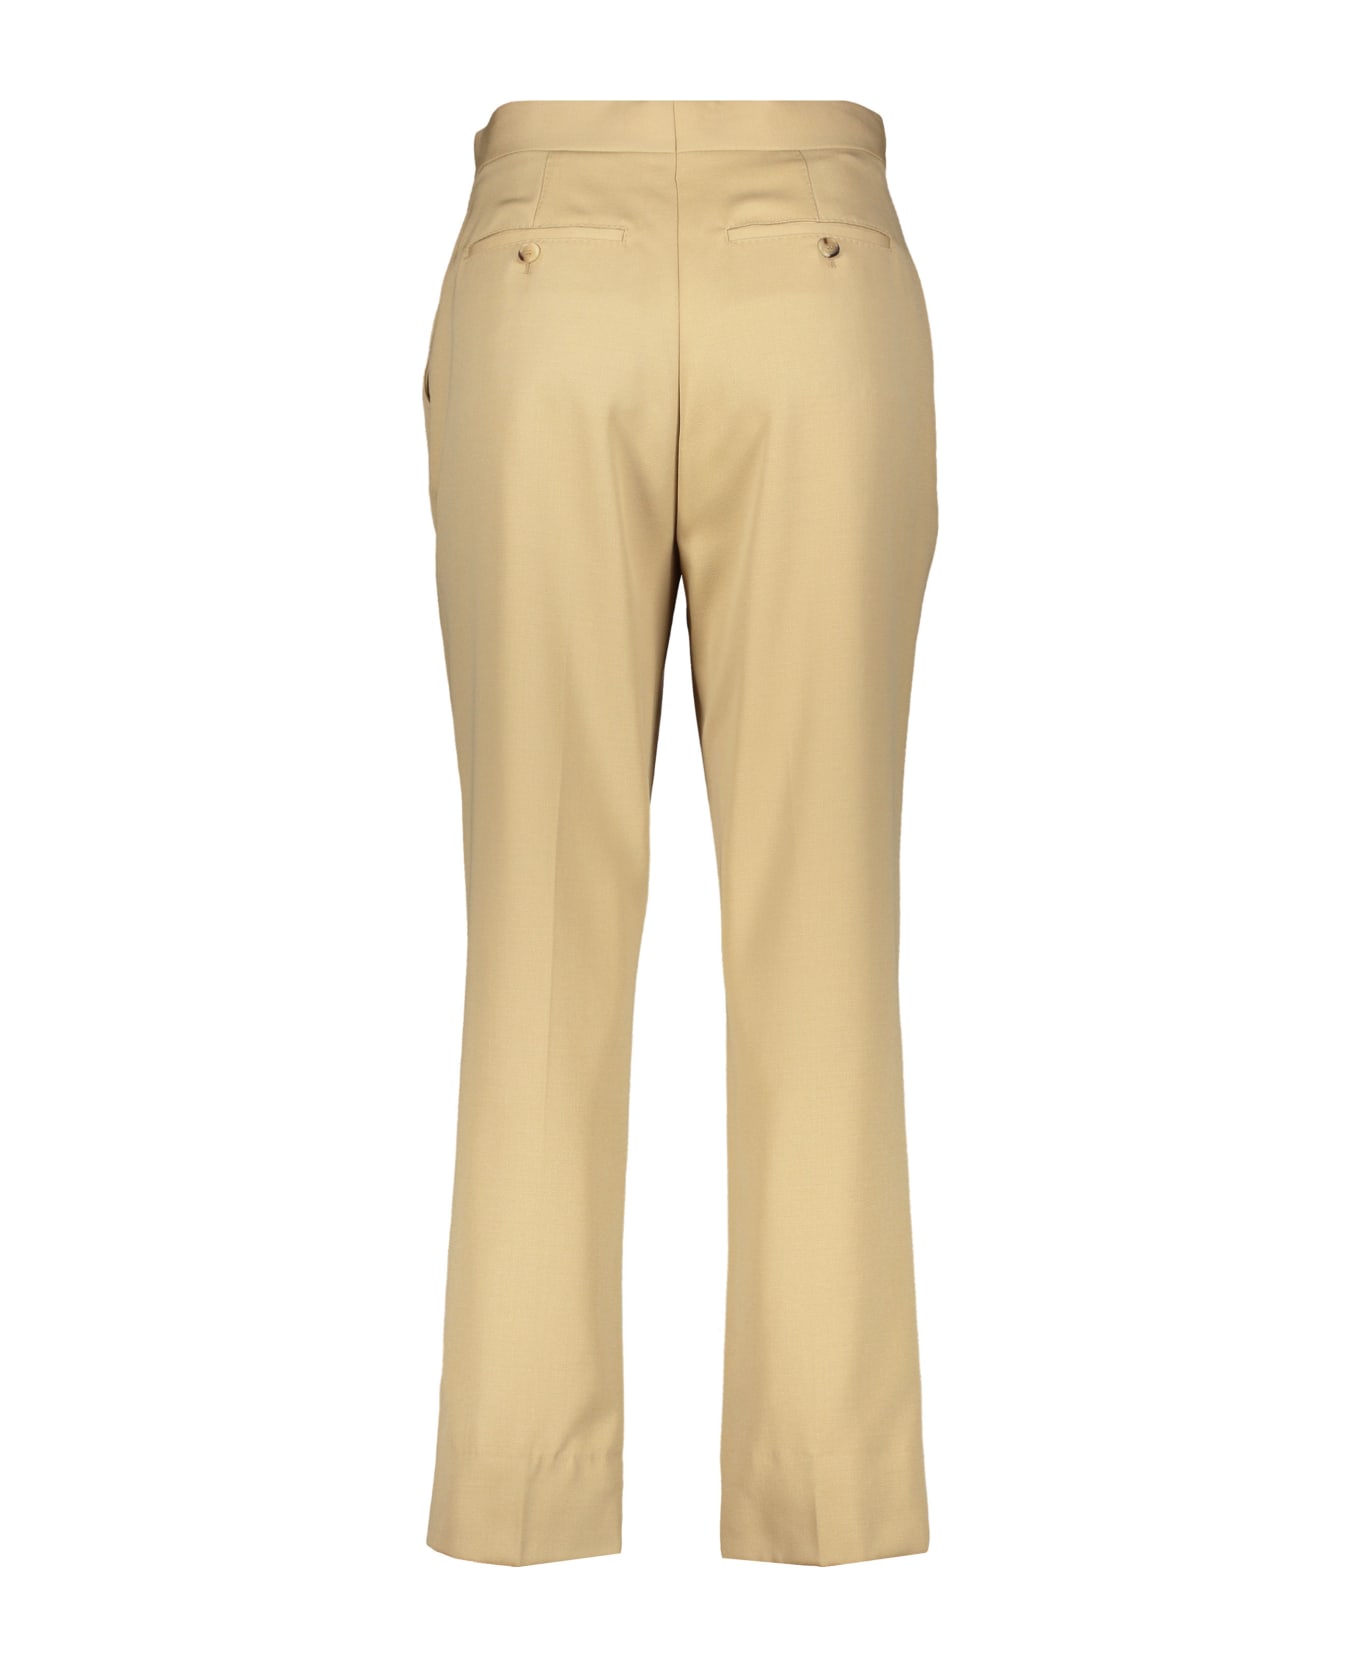 Burberry Wool Trousers - Beige ボトムス